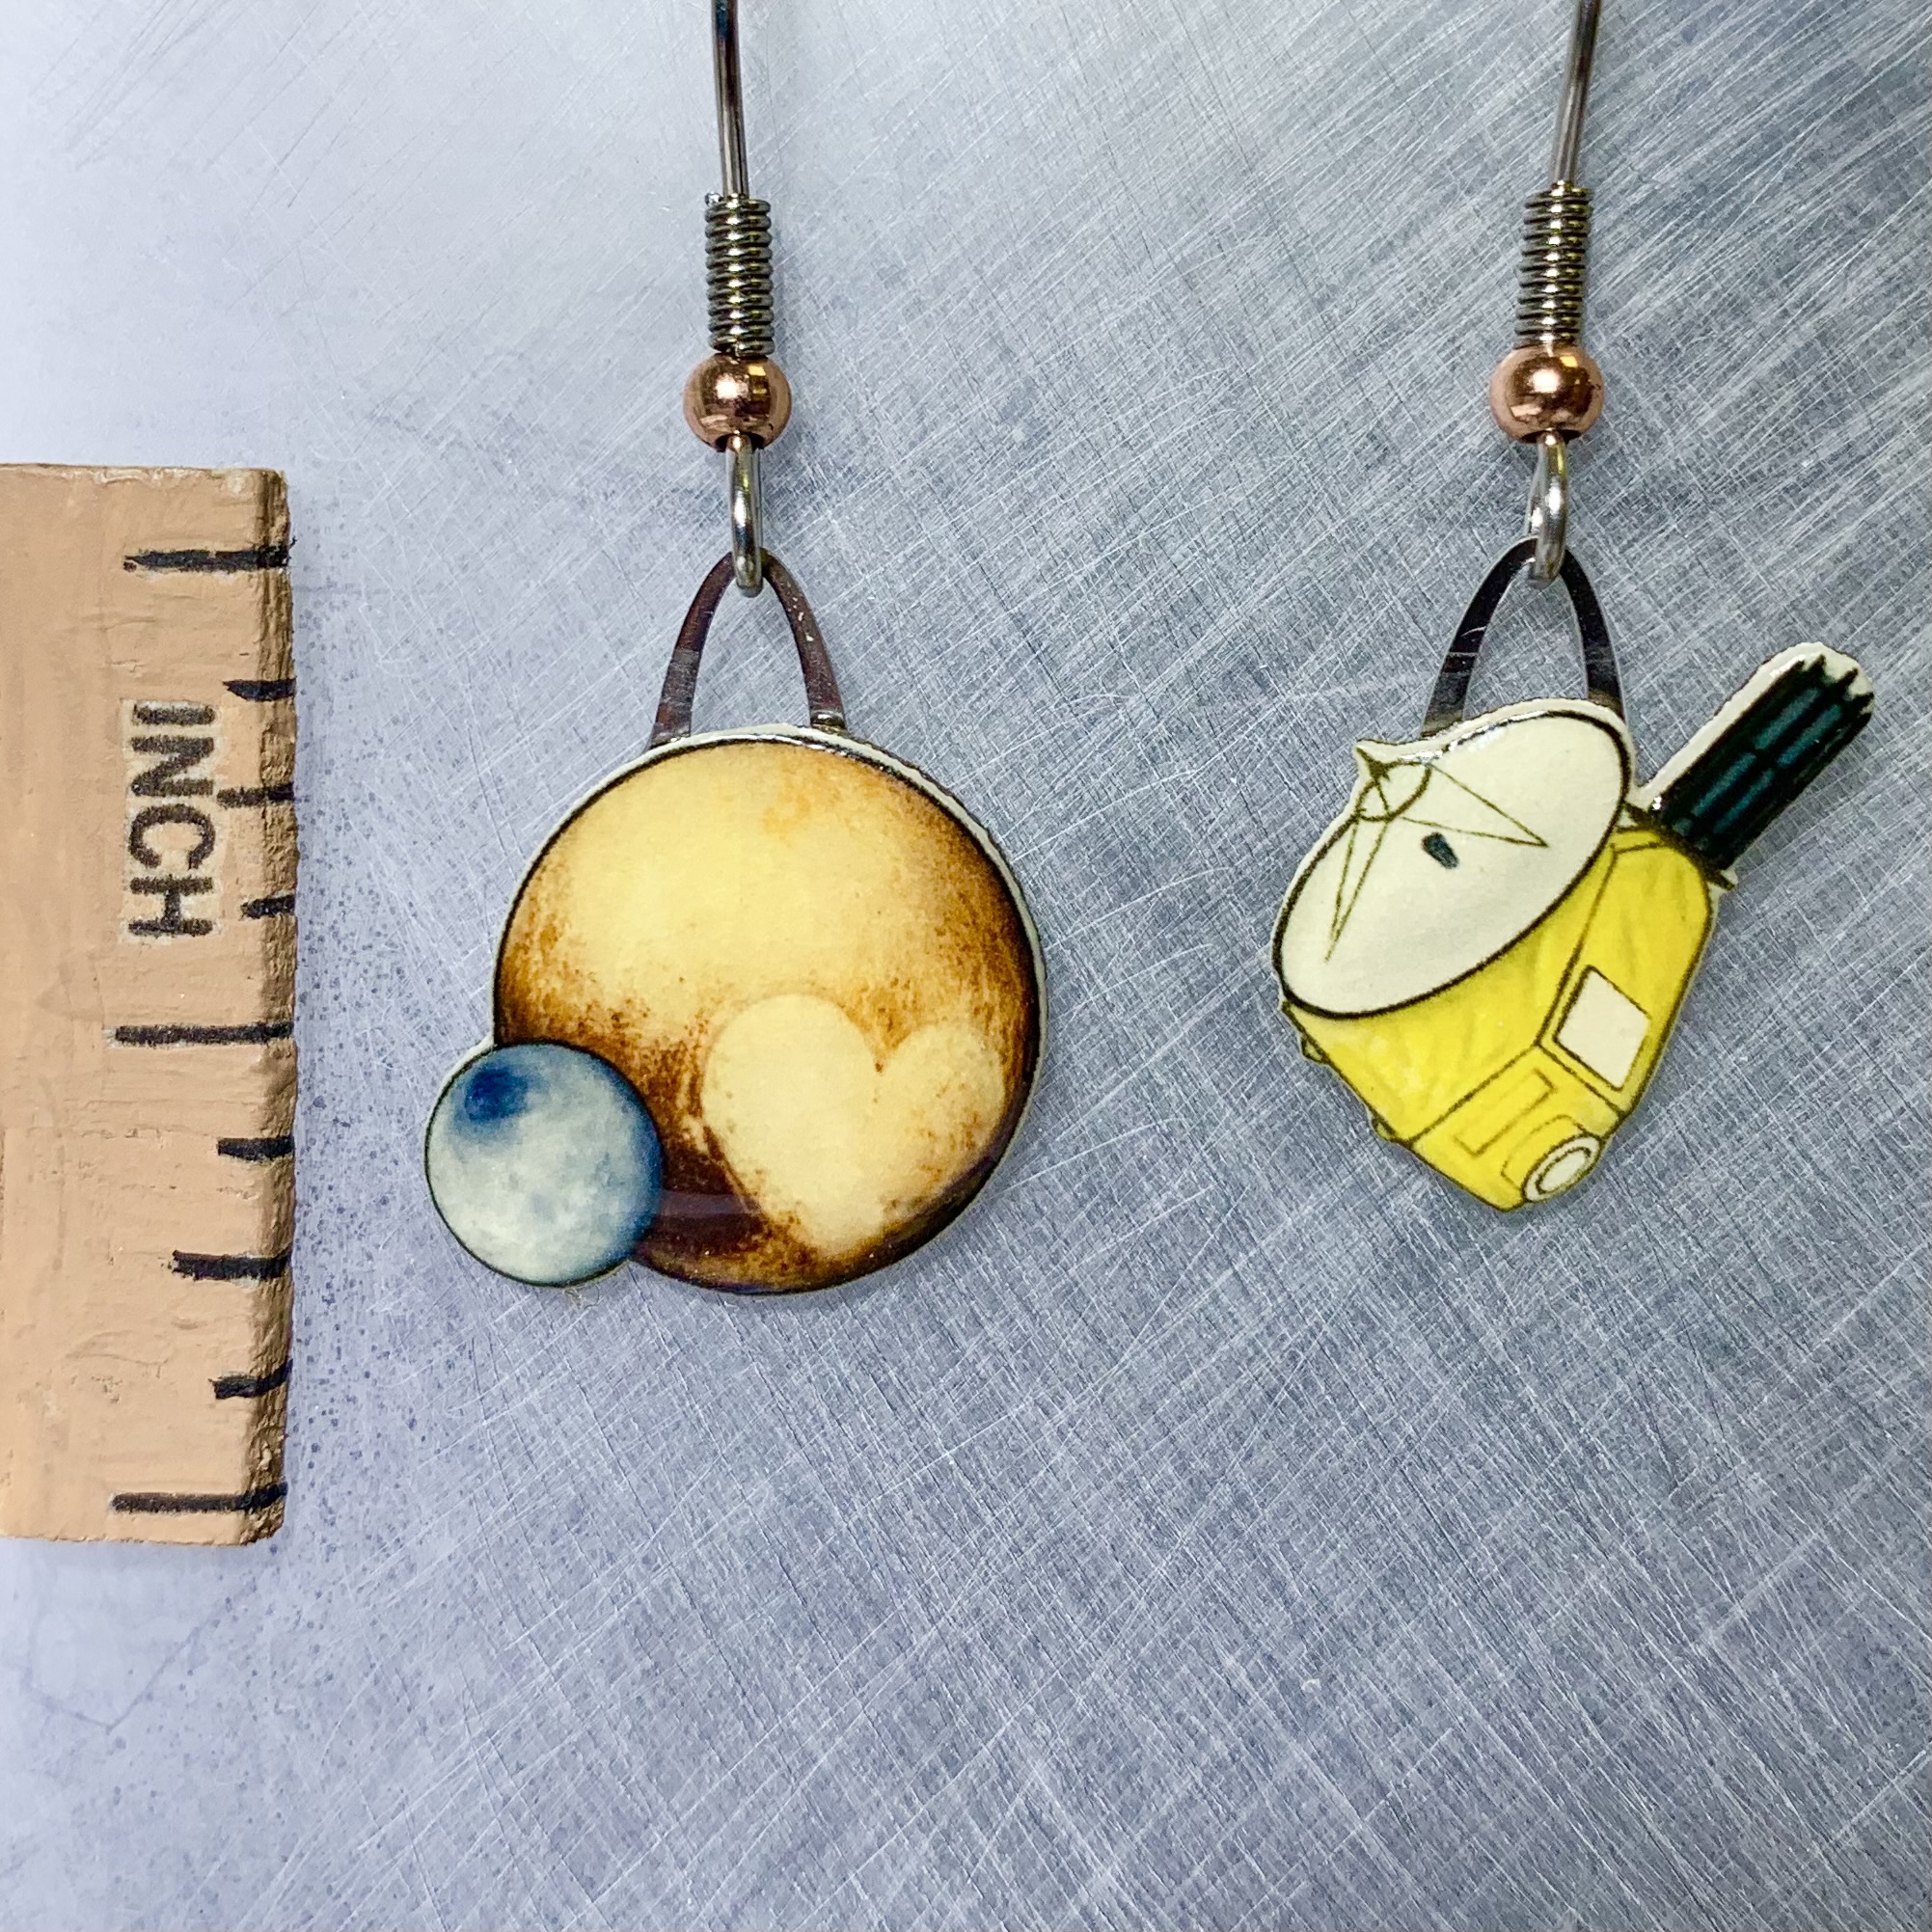 Picture shown is of 1 inch tall pair of earrings of Pluto & New Horizons.